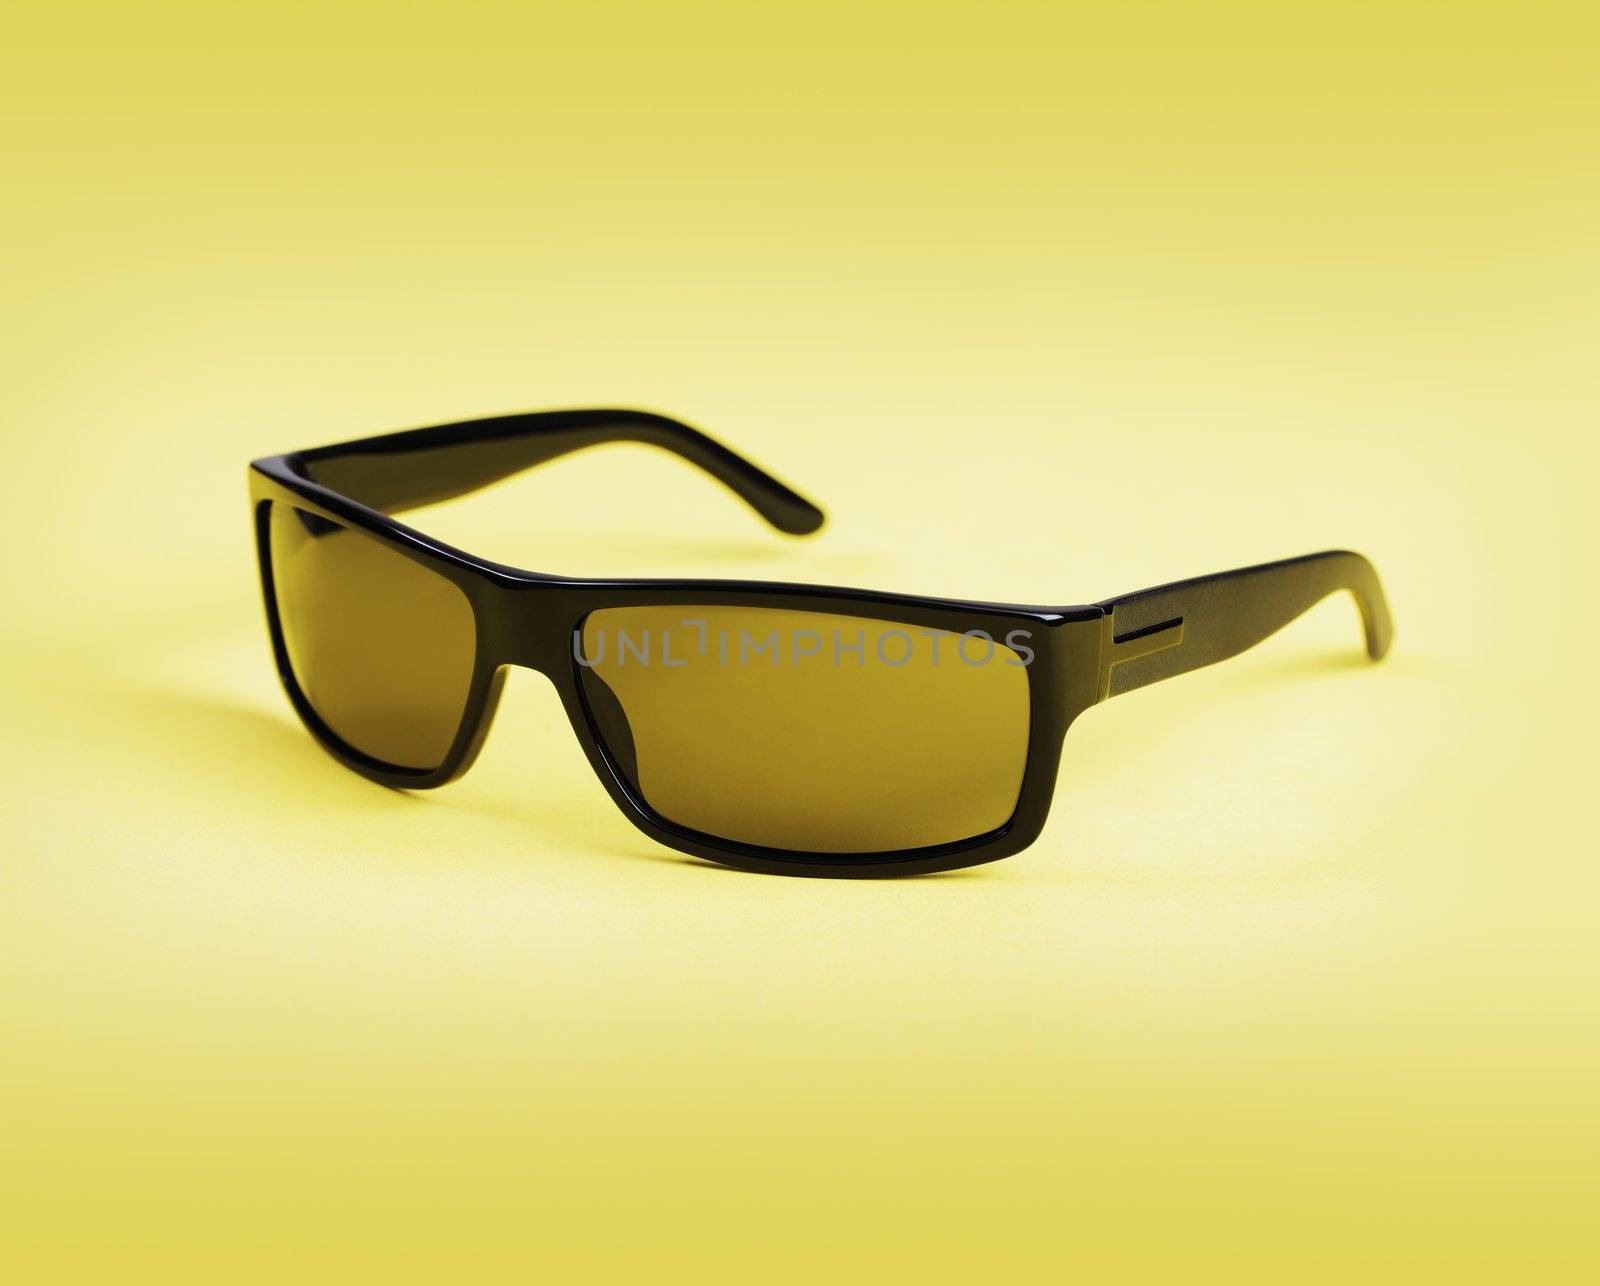 Quality men's sunglasses on yellow background.